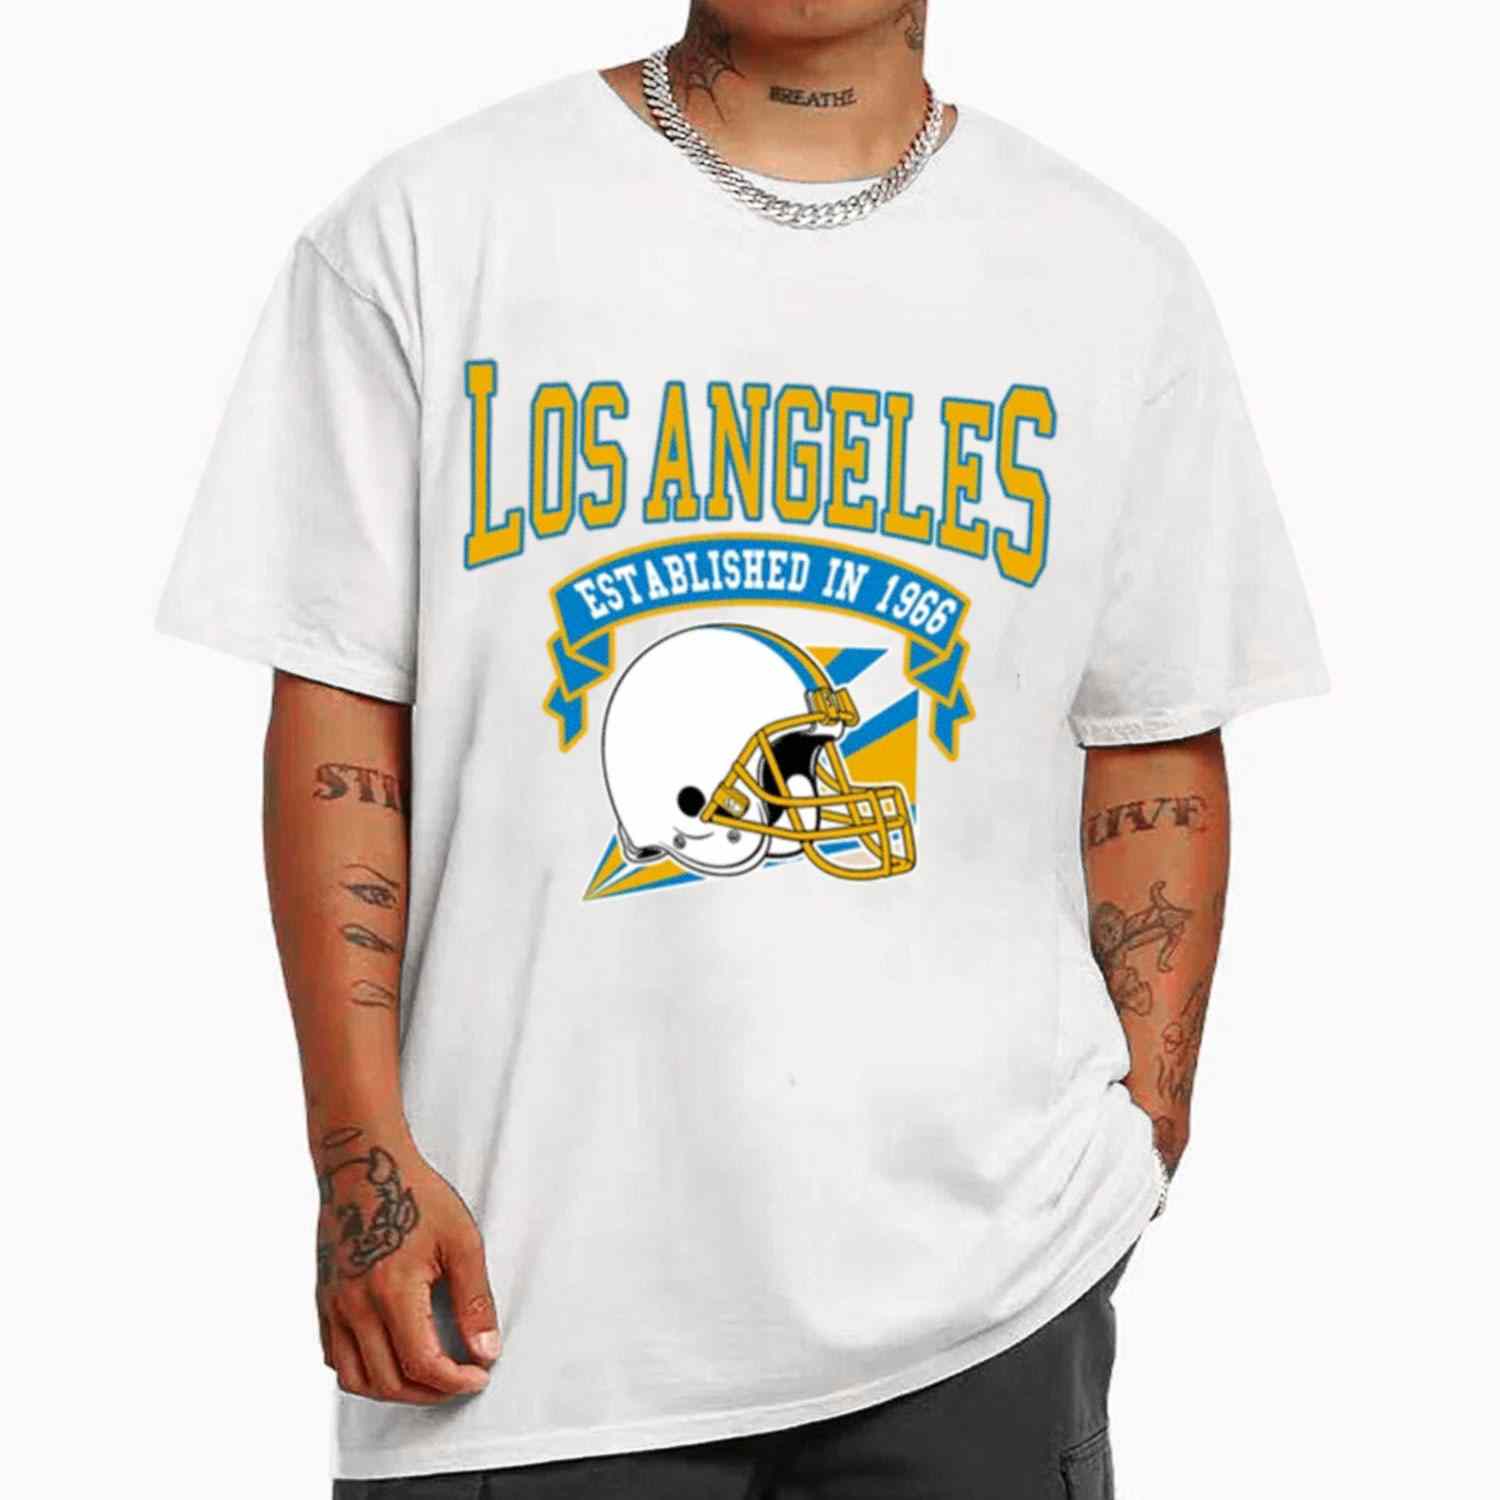 Vintage Football Team Los Angeles Chargers Established In 1966 T-Shirt